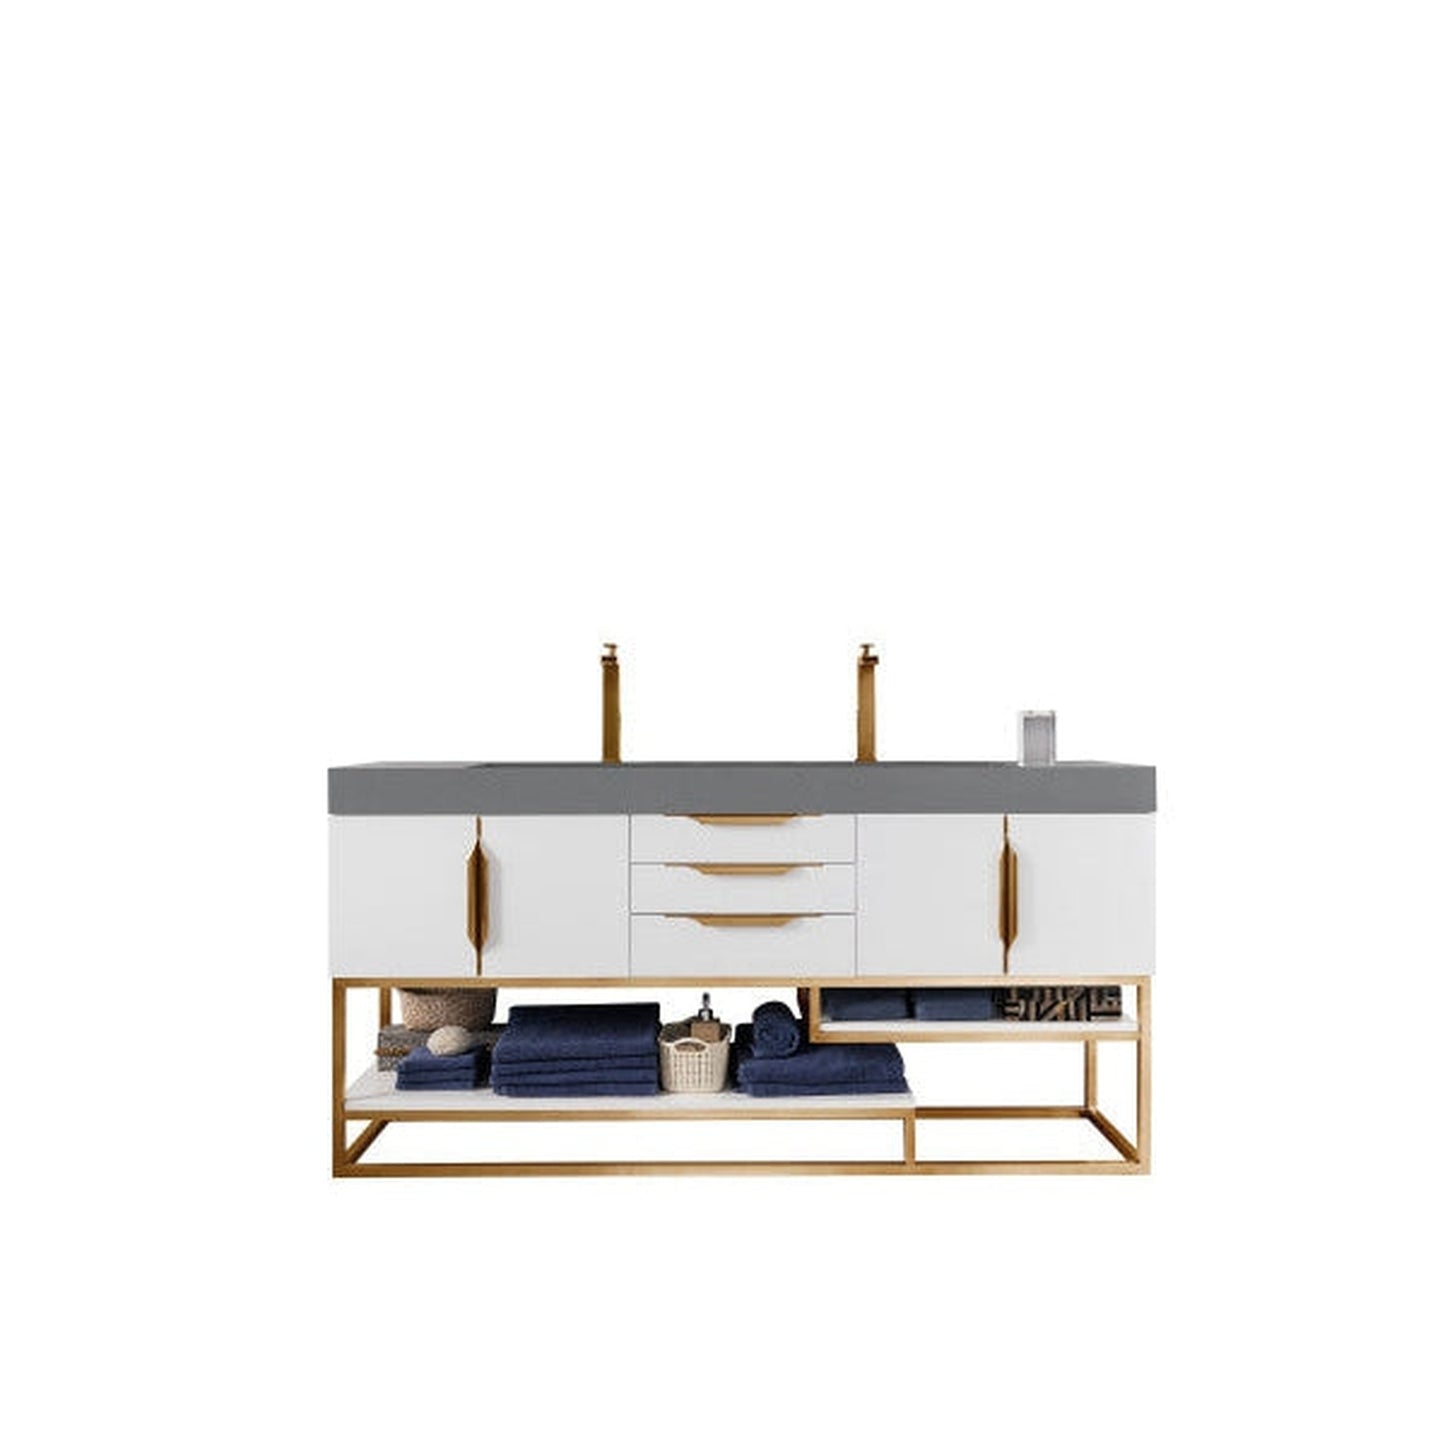 James Martin Columbia 73" Double Glossy White Bathroom Vanity With Radiant Gold Hardware and 6" Glossy Dusk Gray Composite Countertop